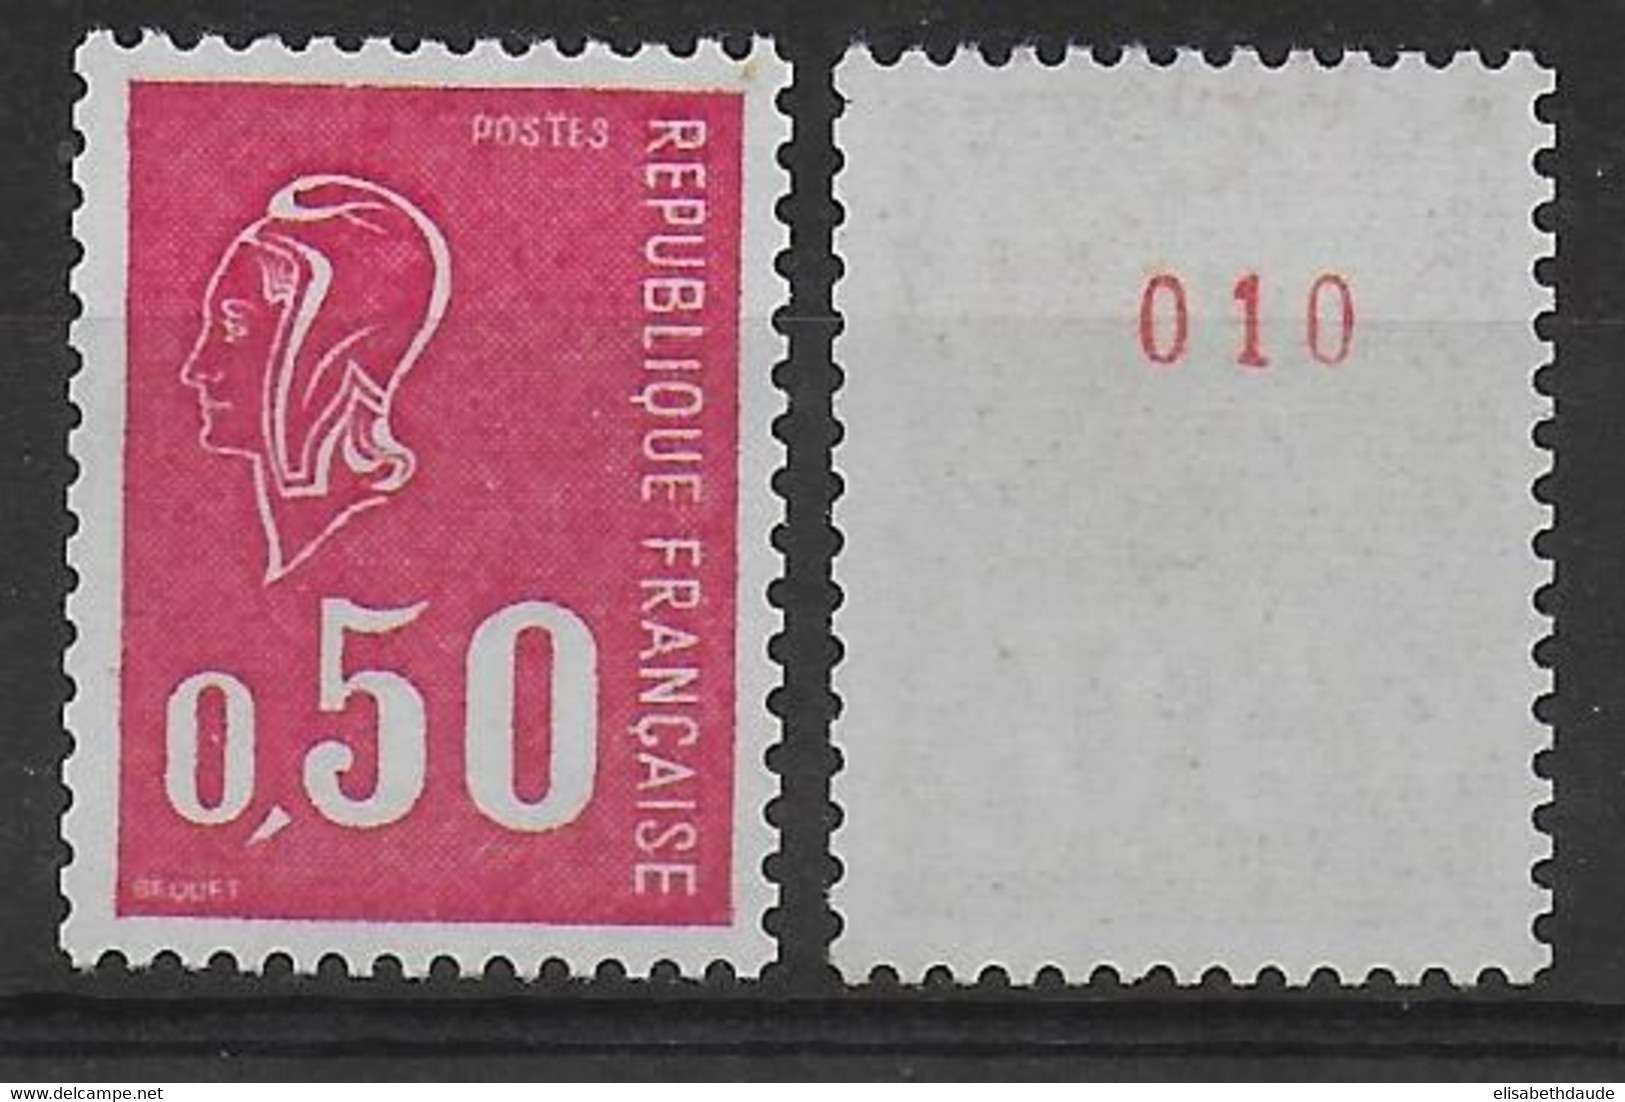 MARIANNE De BEQUET - ROULETTE N° ROUGE - YVERT 1664b GOMME NORMALE - COTE = 25 EUR - Coil Stamps